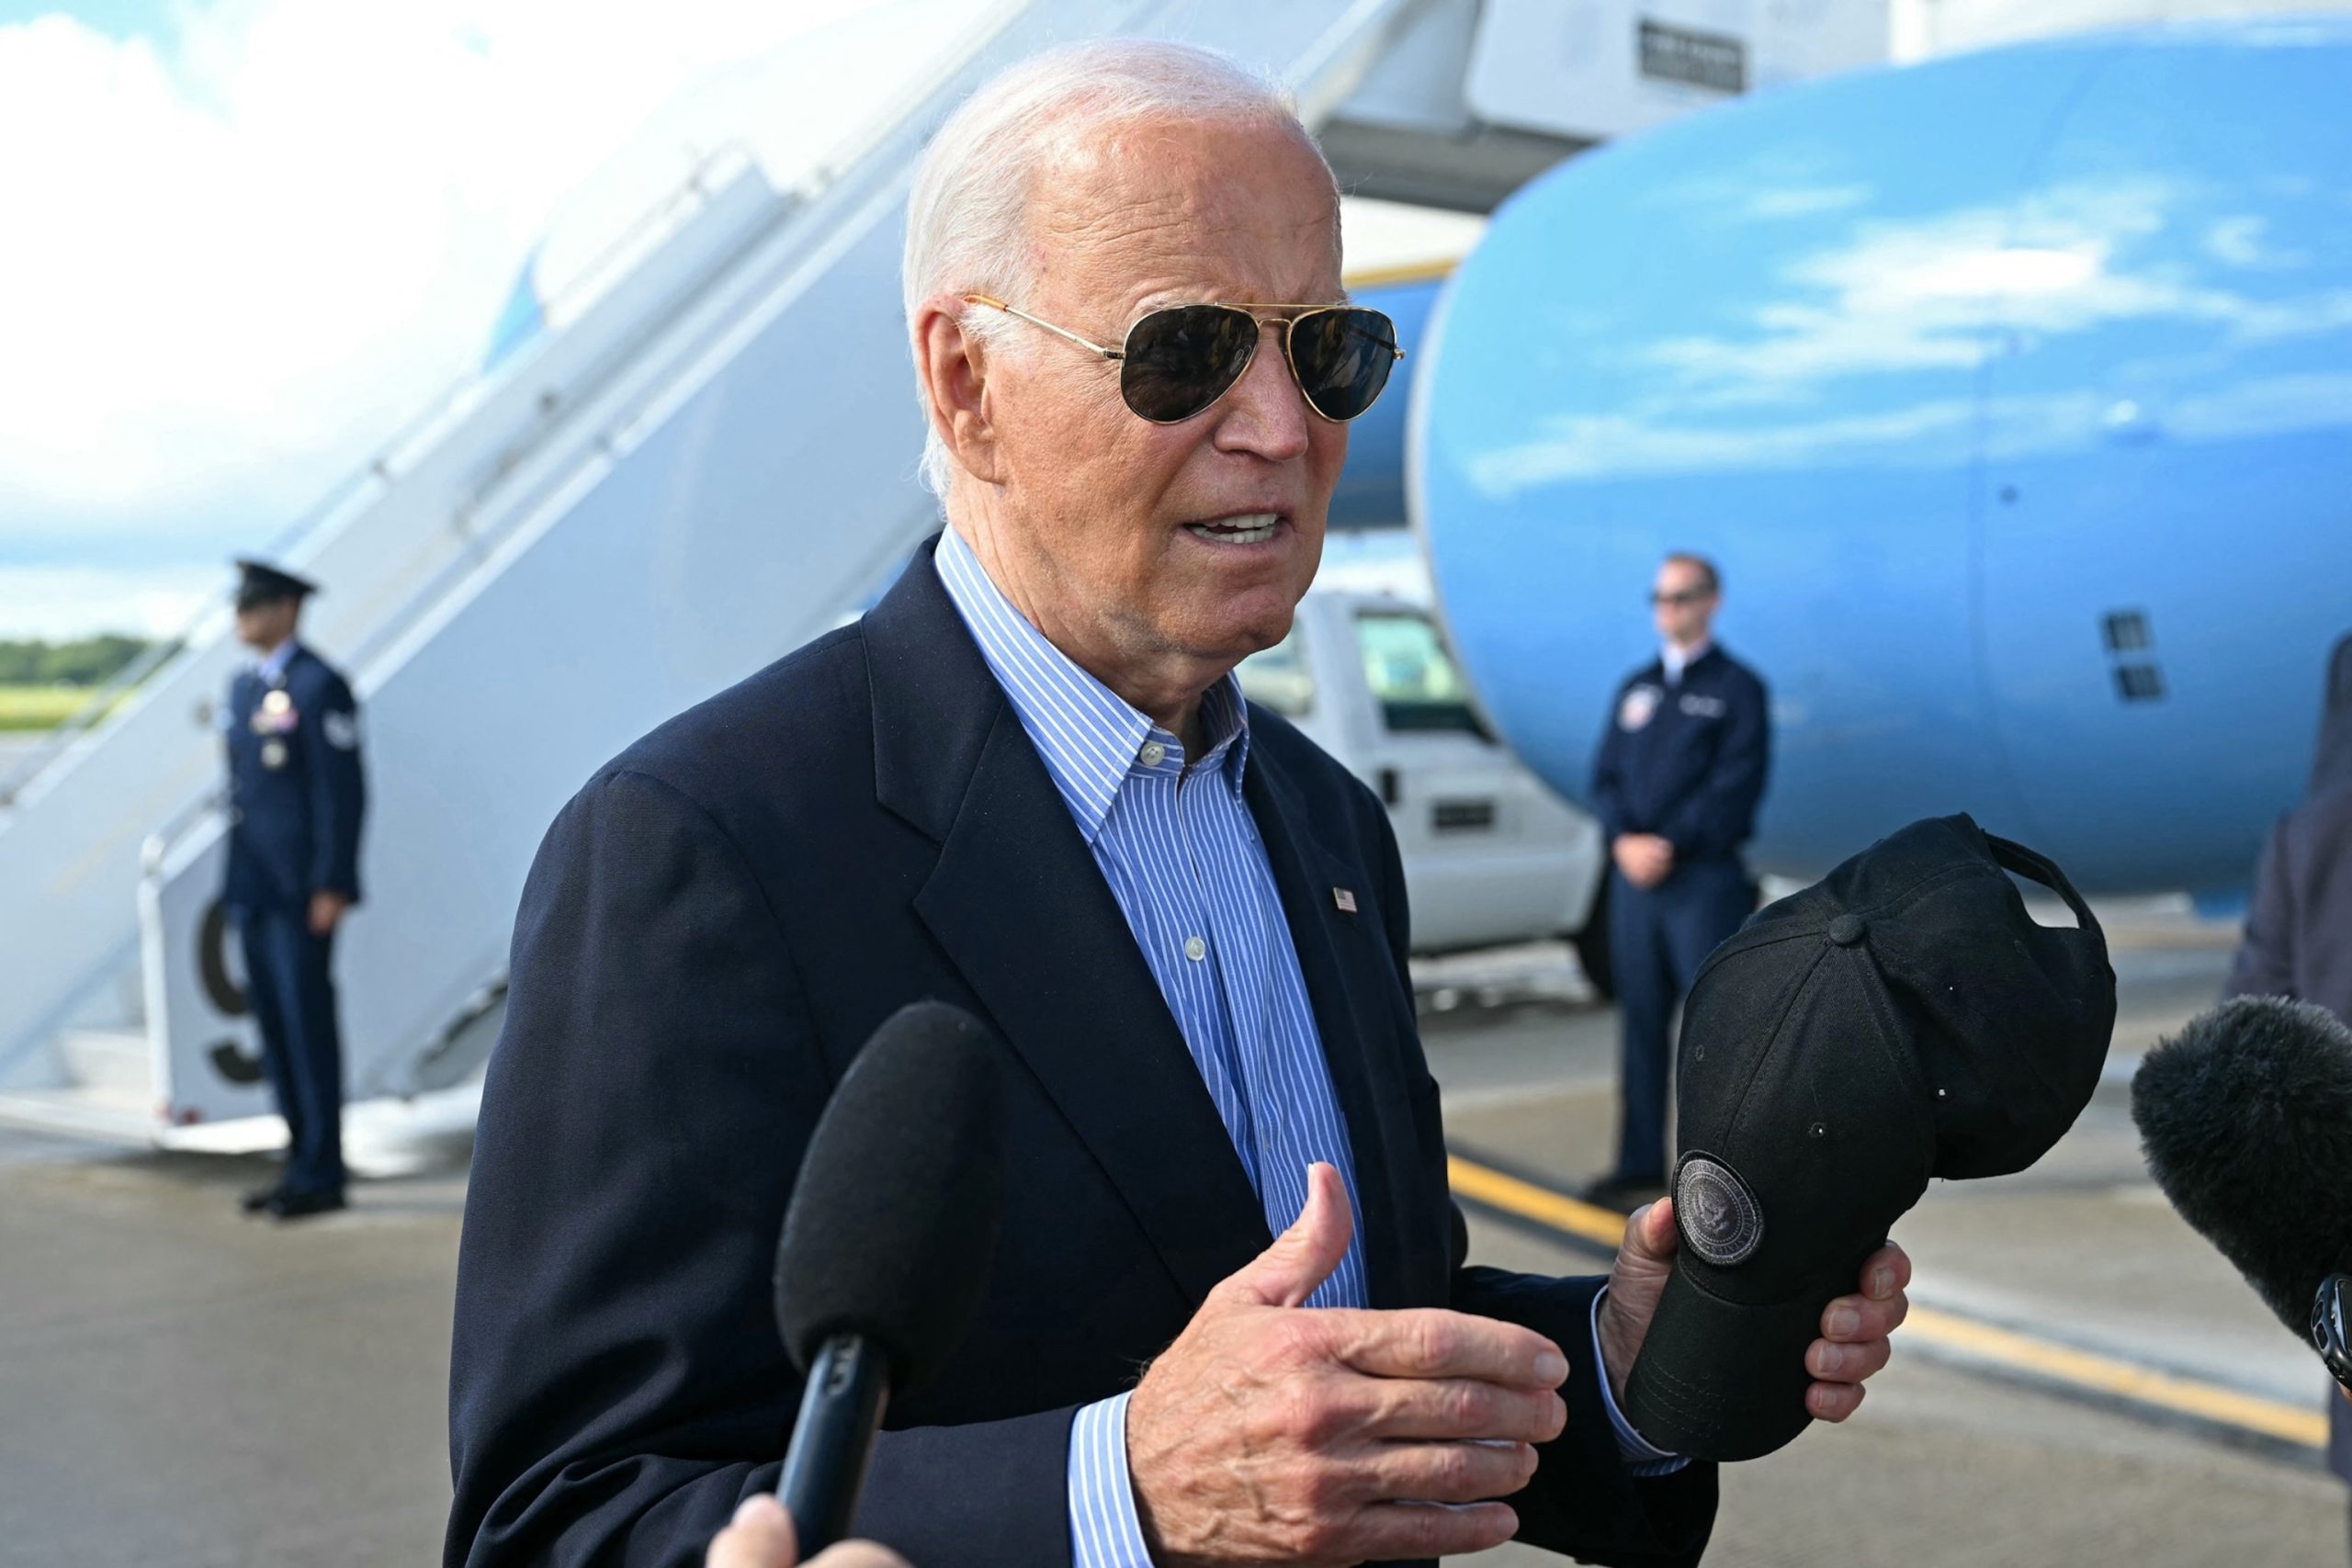 Calls for Biden to Step Aside Continue from Major Democratic Donors Following ABC News Interview